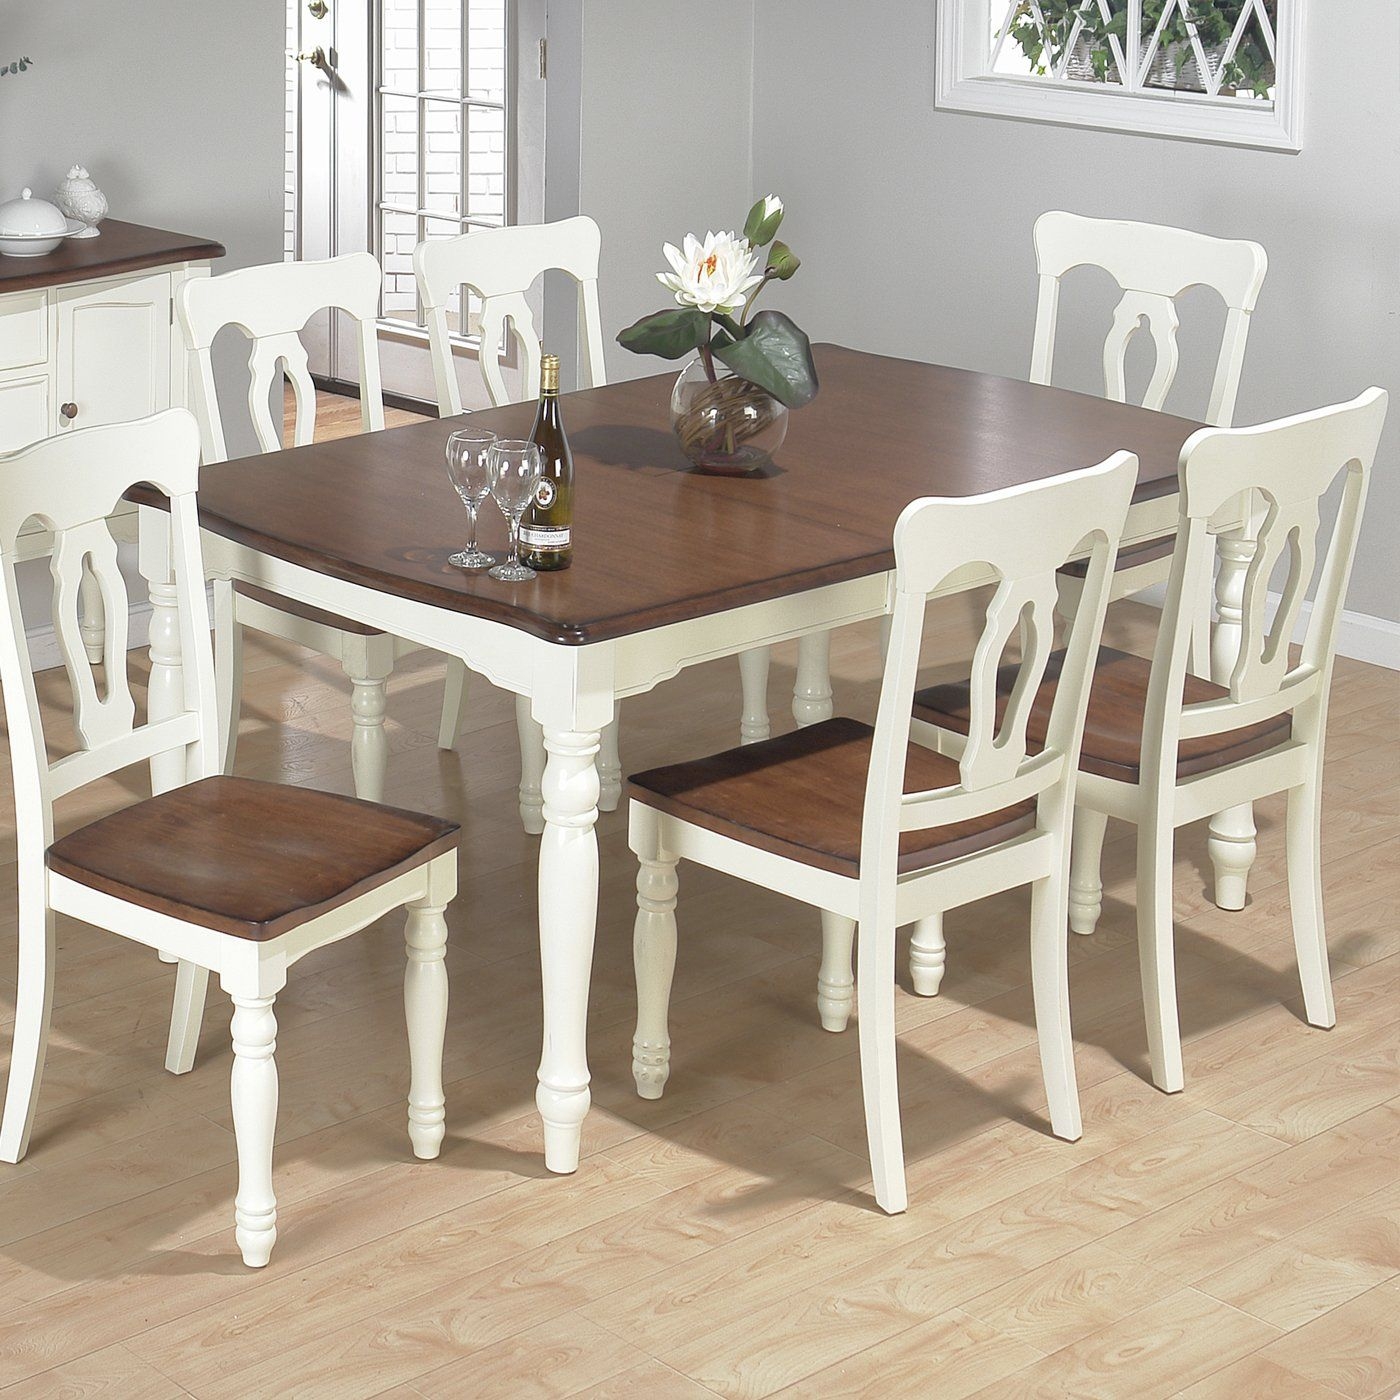 Jofran 630 72 rectangle butterfly leaf dining table vanilla cream